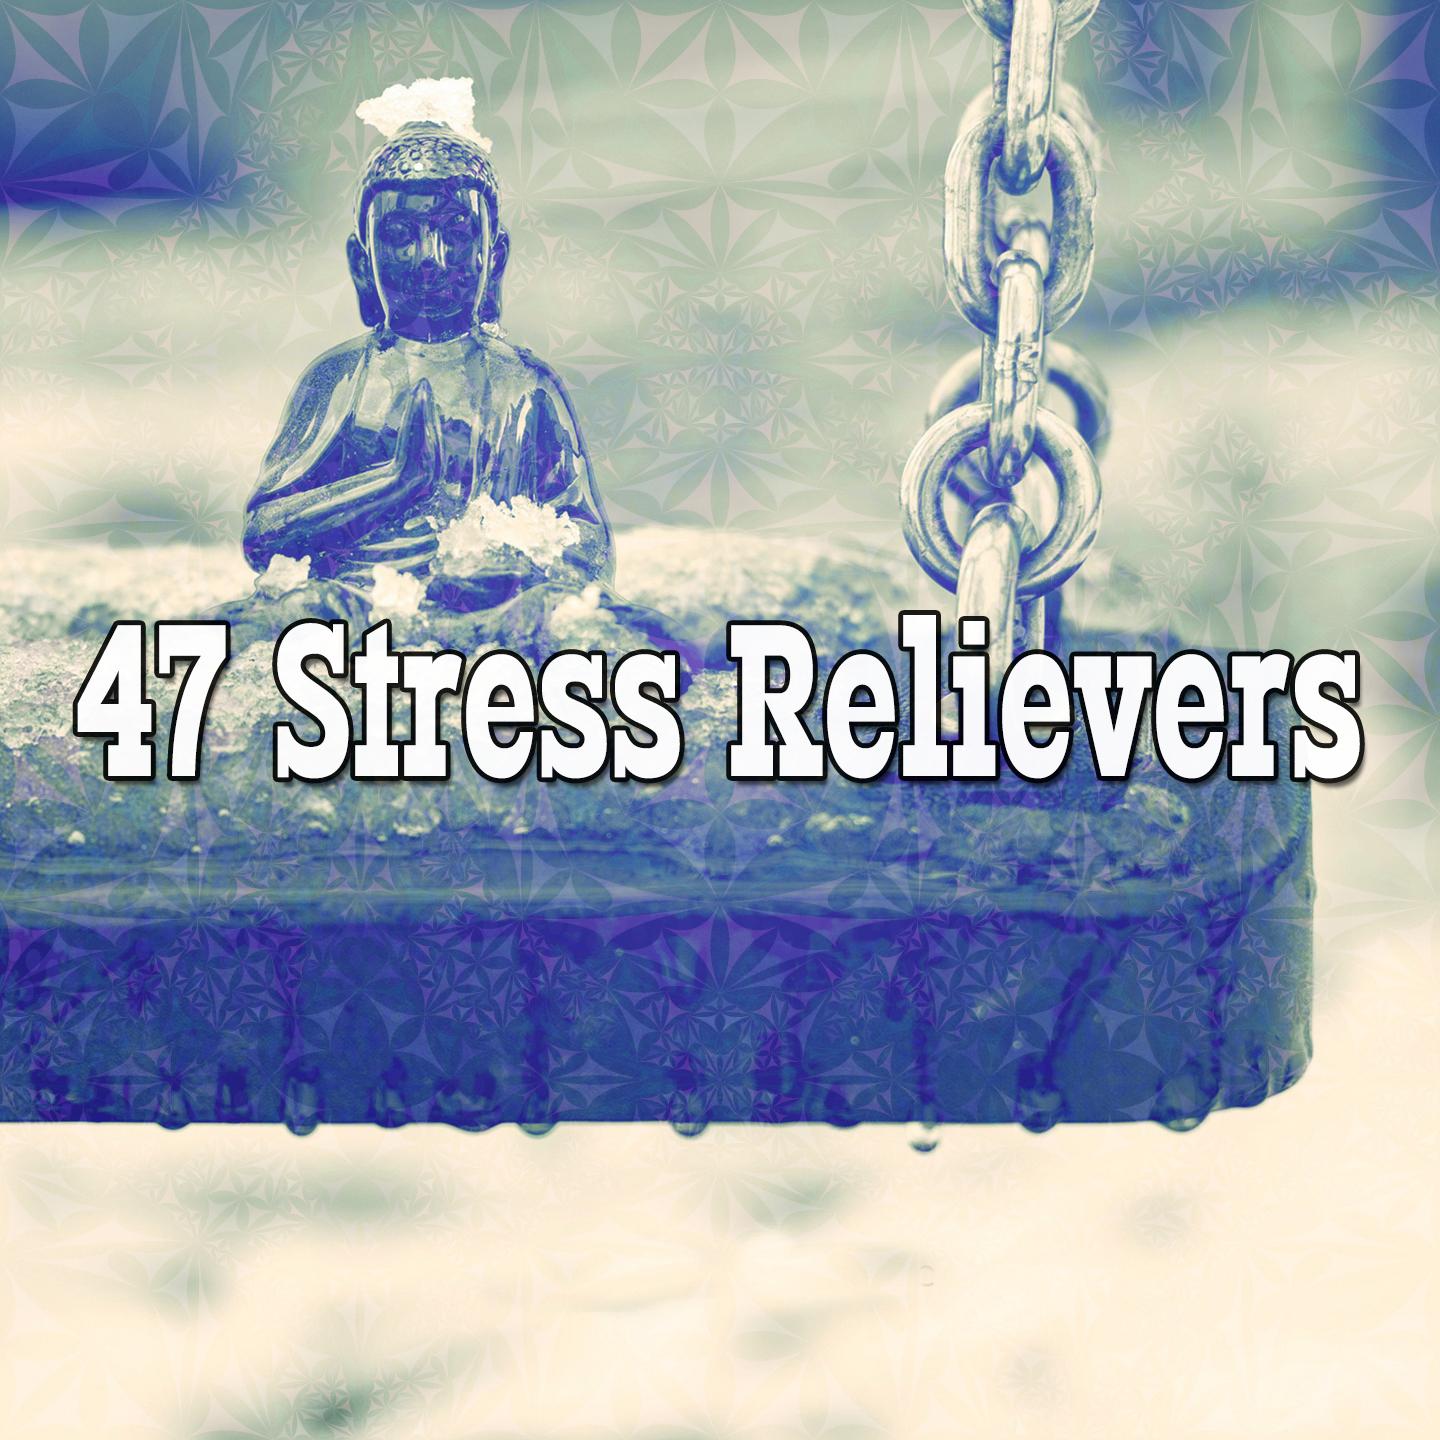 47 Stress Relievers